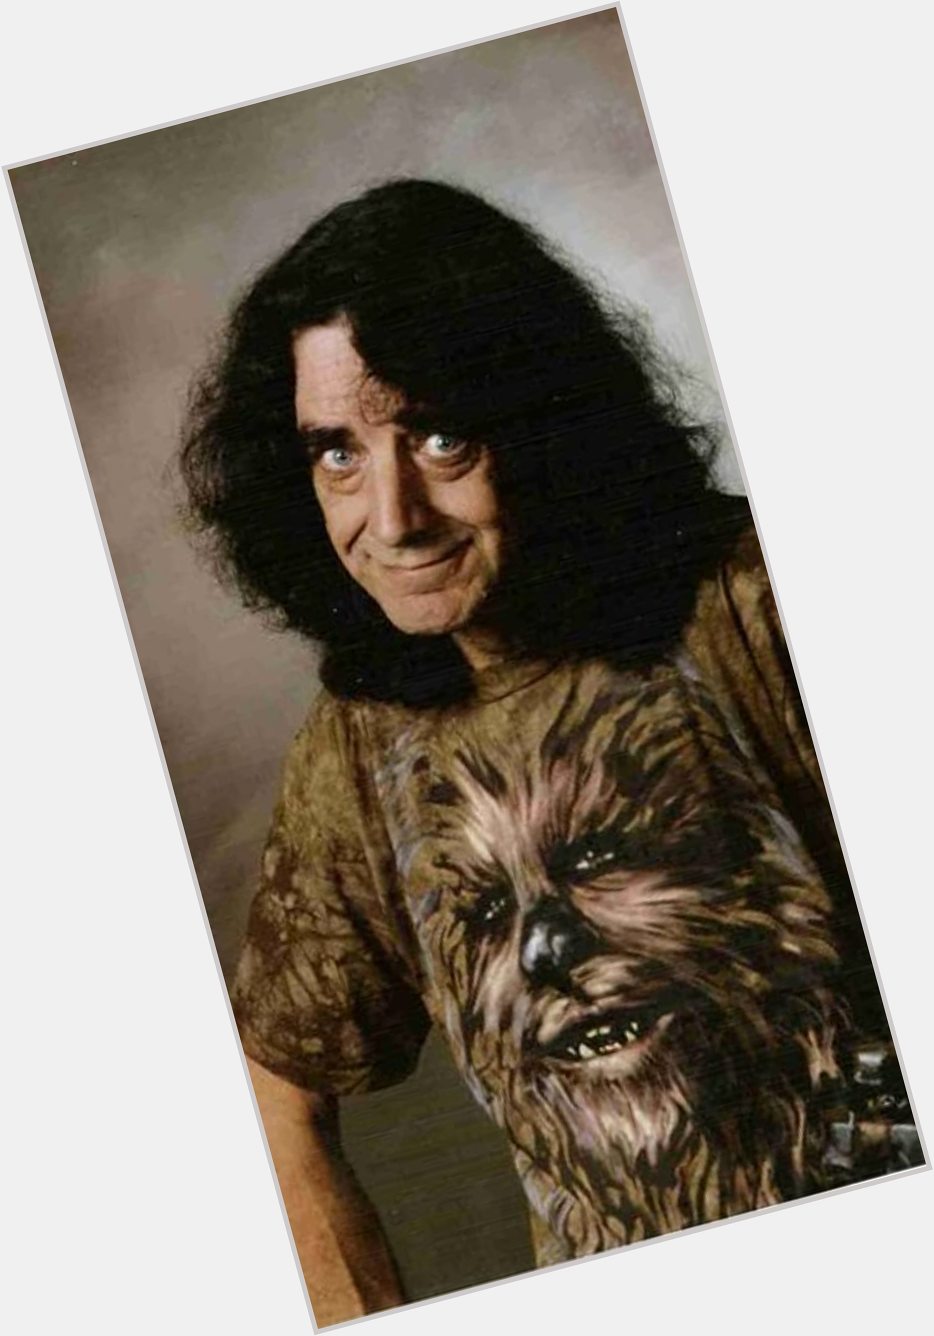 Happy Birthday, to the late Peter Mayhew
For Disney, he portrayed Chewbacca in the film franchise 